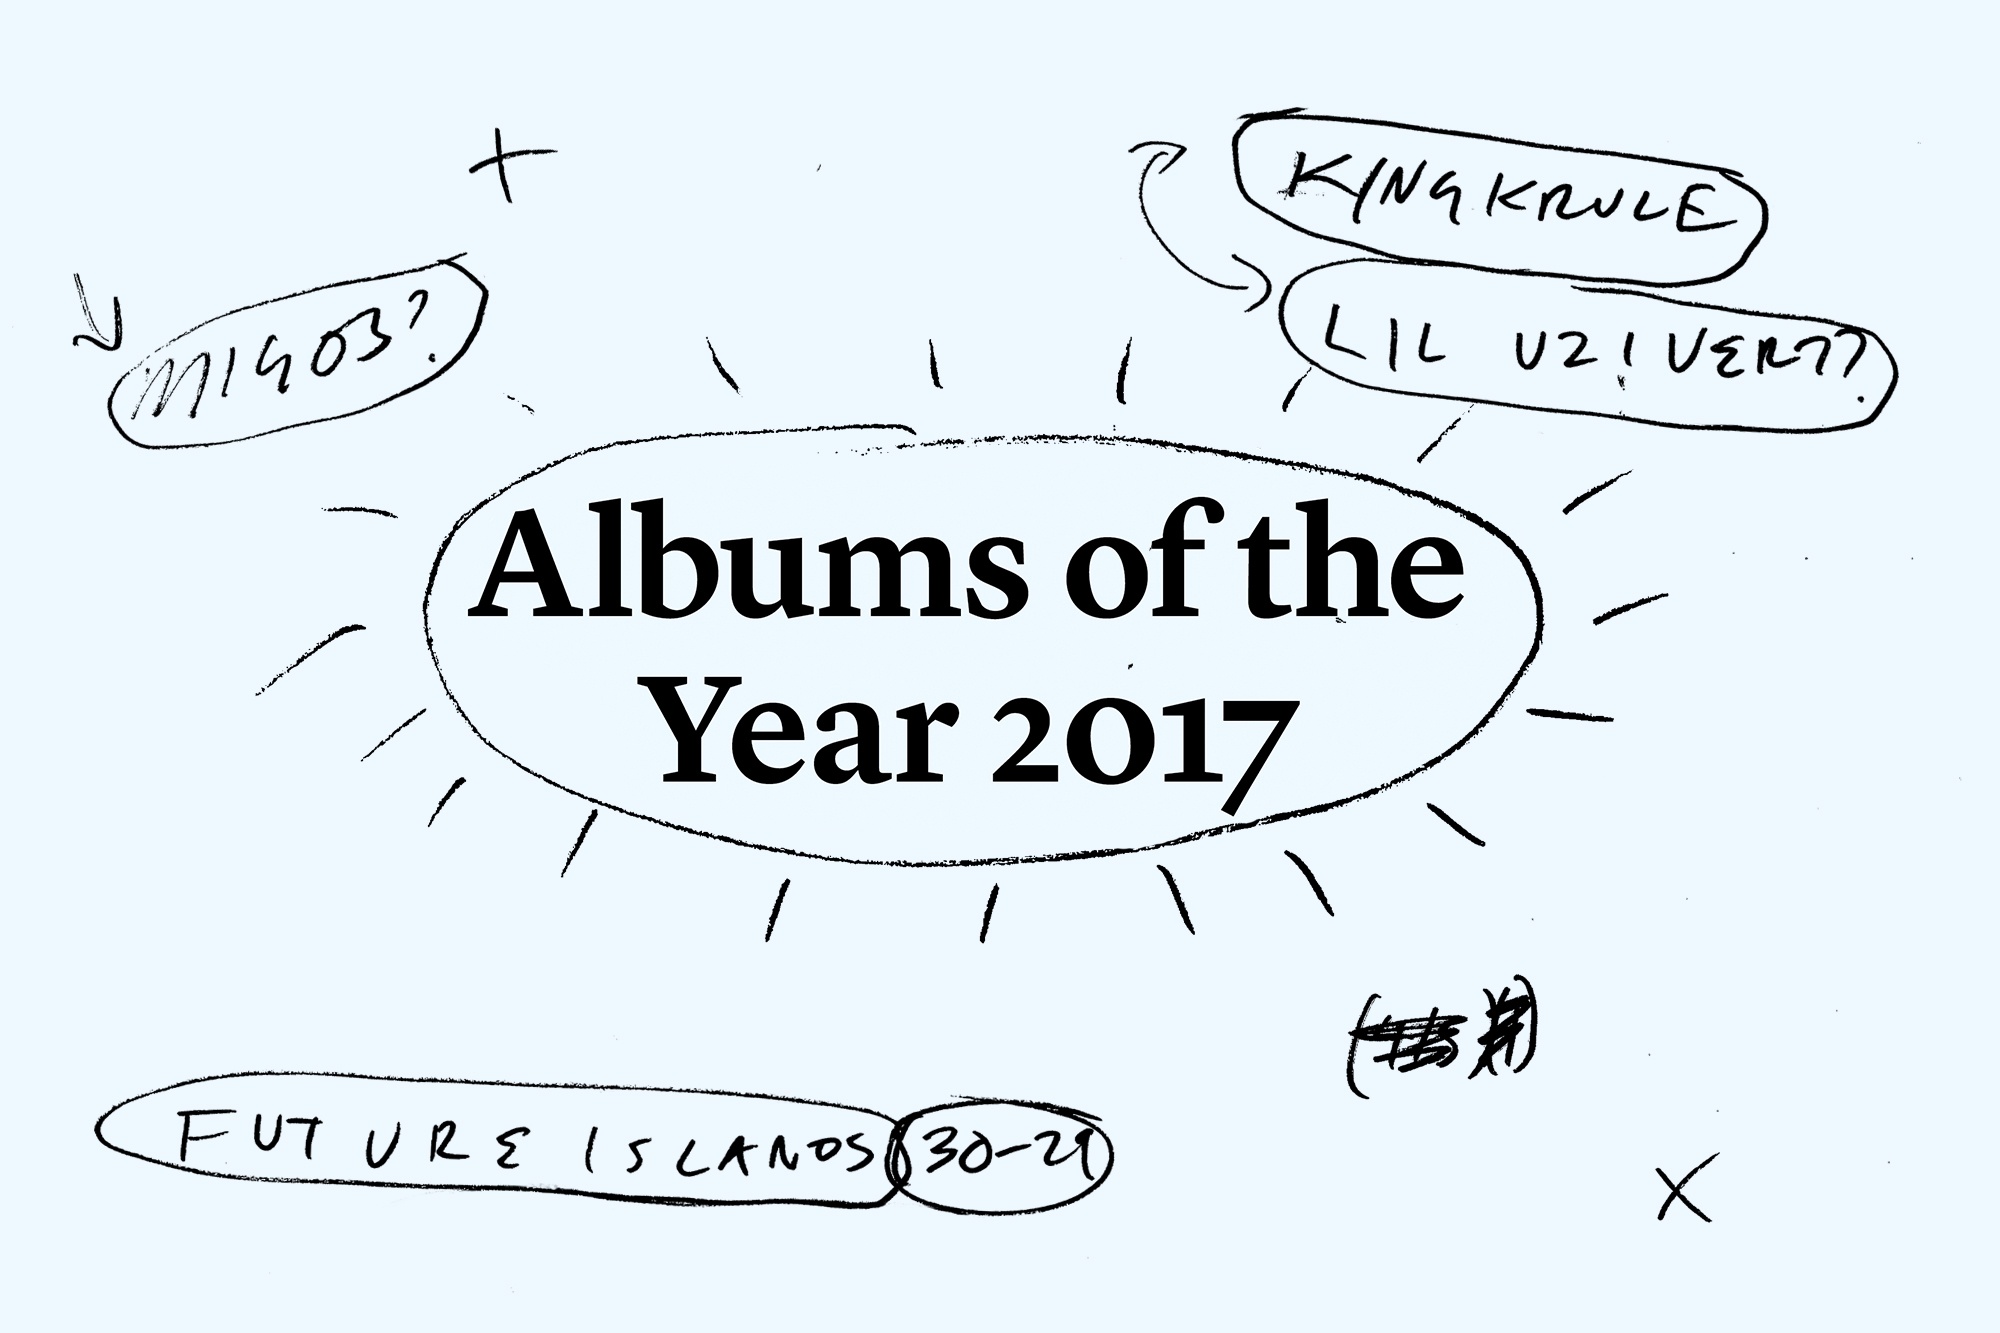 The 50 Best Albums of 2017, Page 2